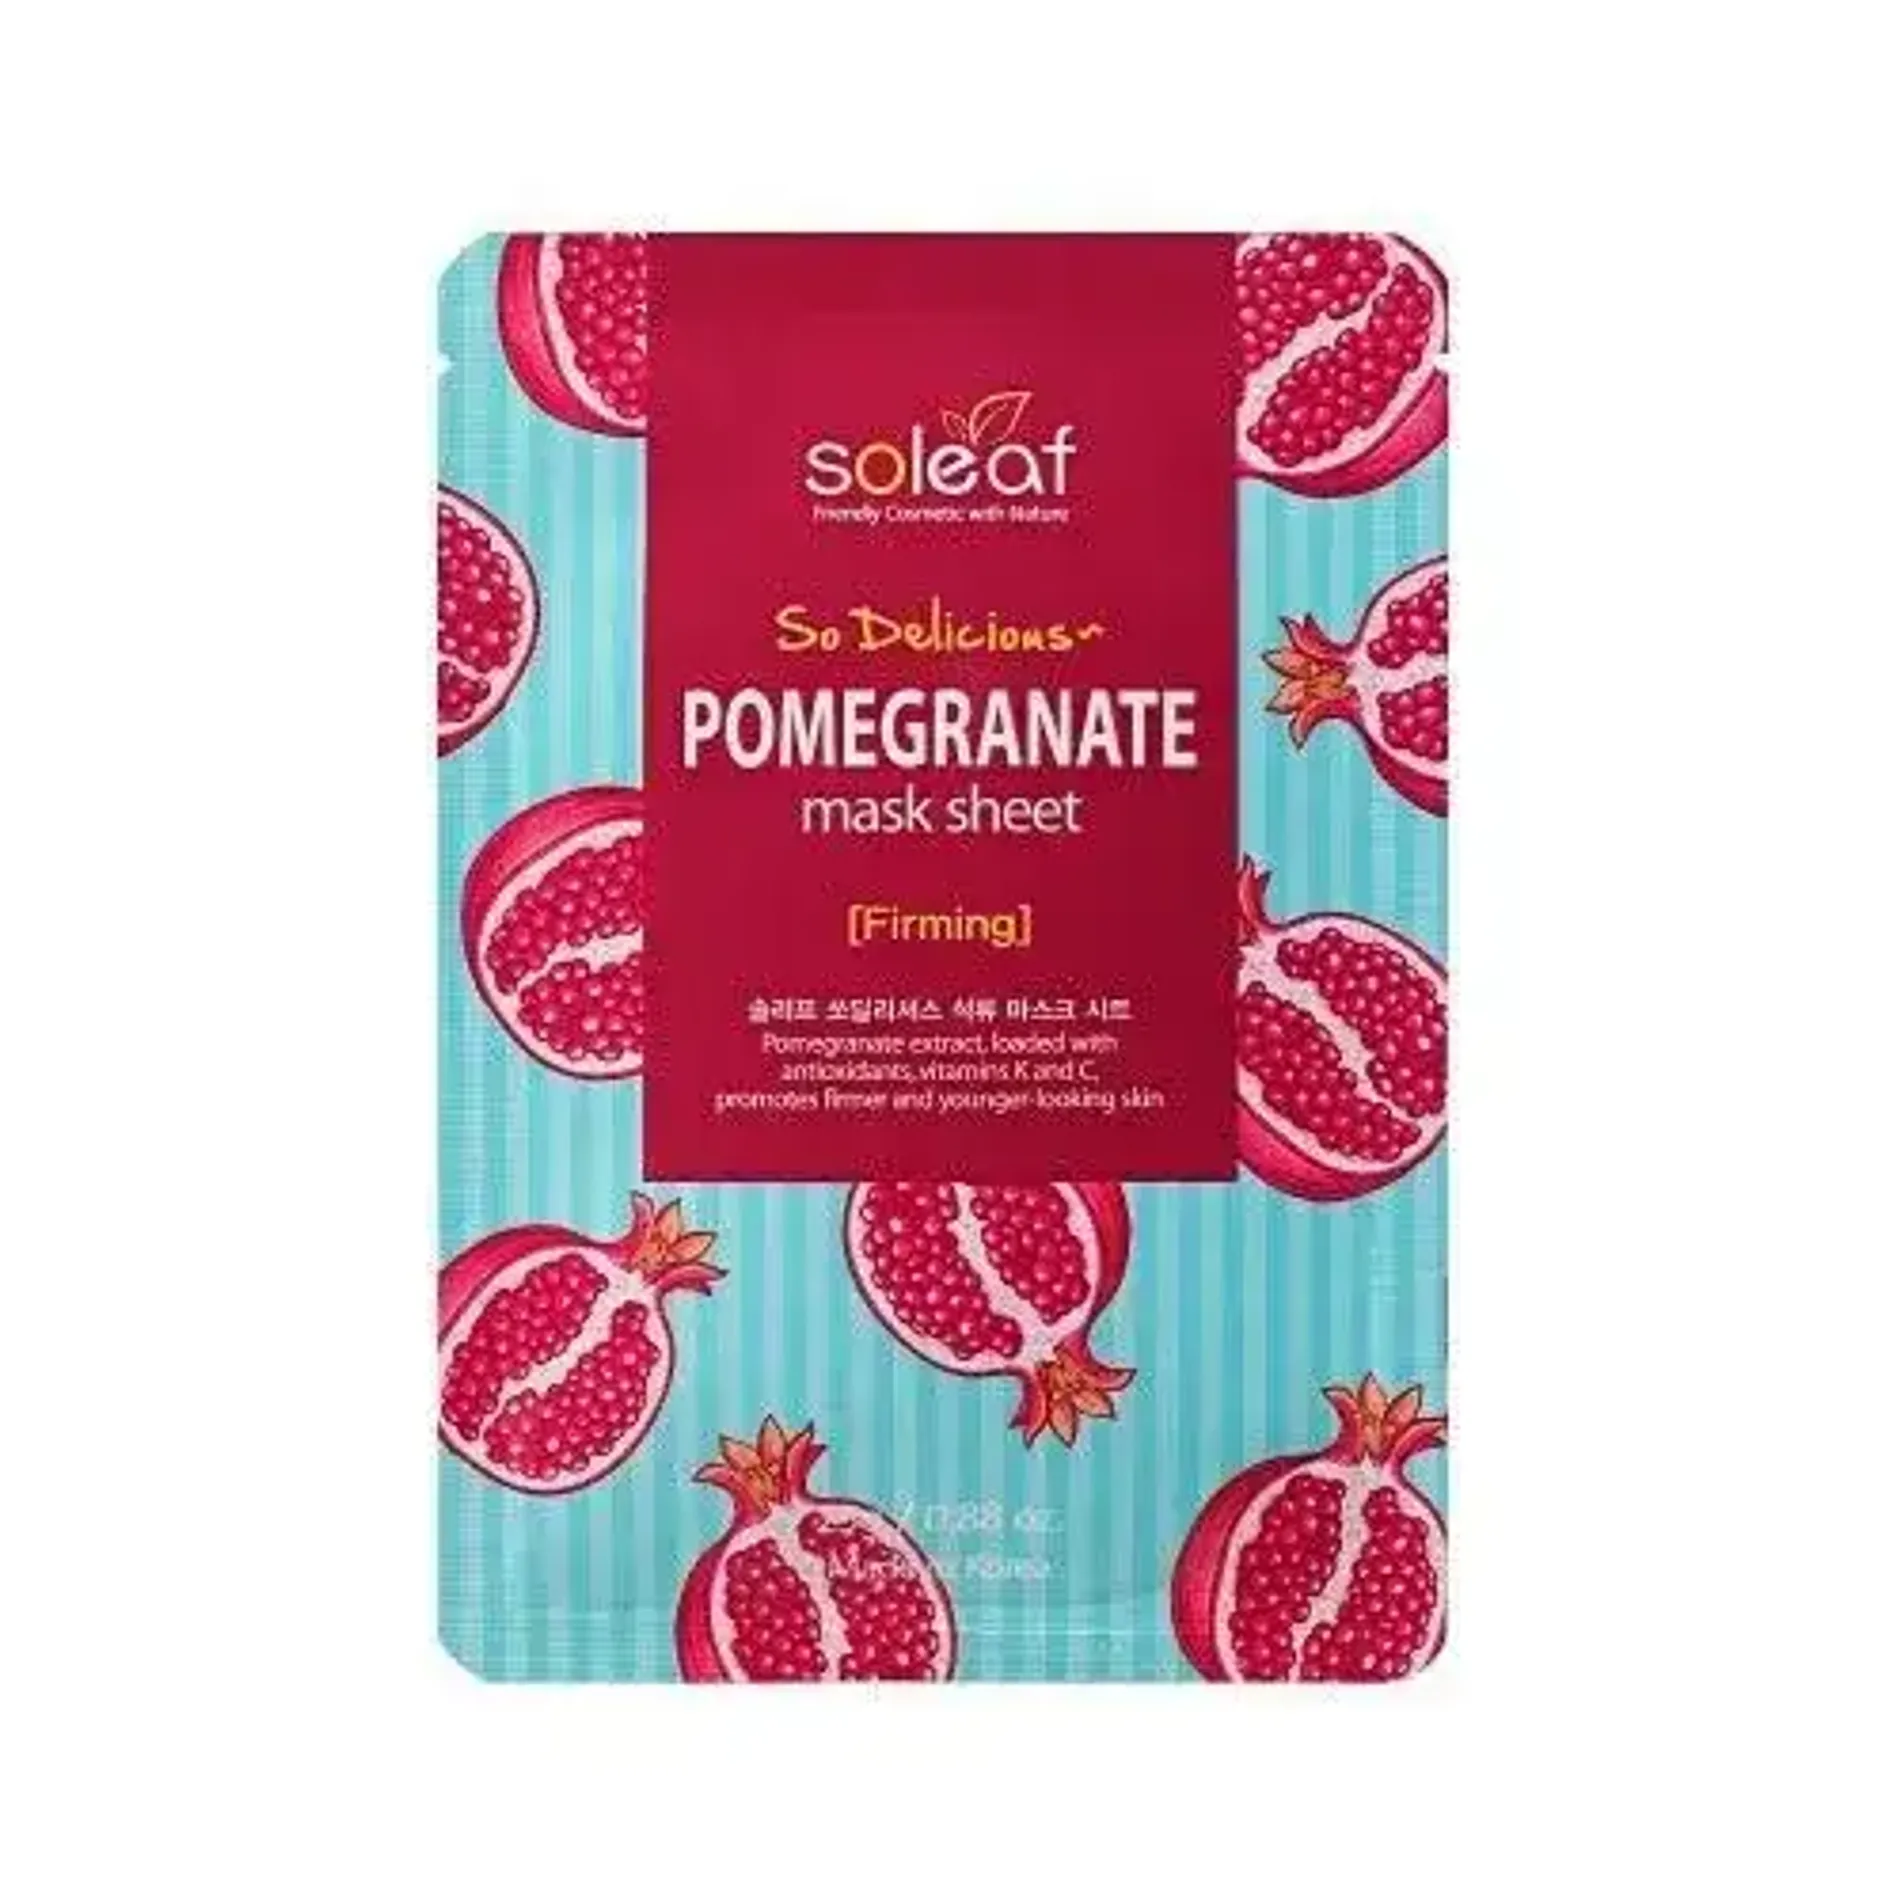 mat-na-giay-soleaf-so-delicious-pomegranate-mask-sheet-1